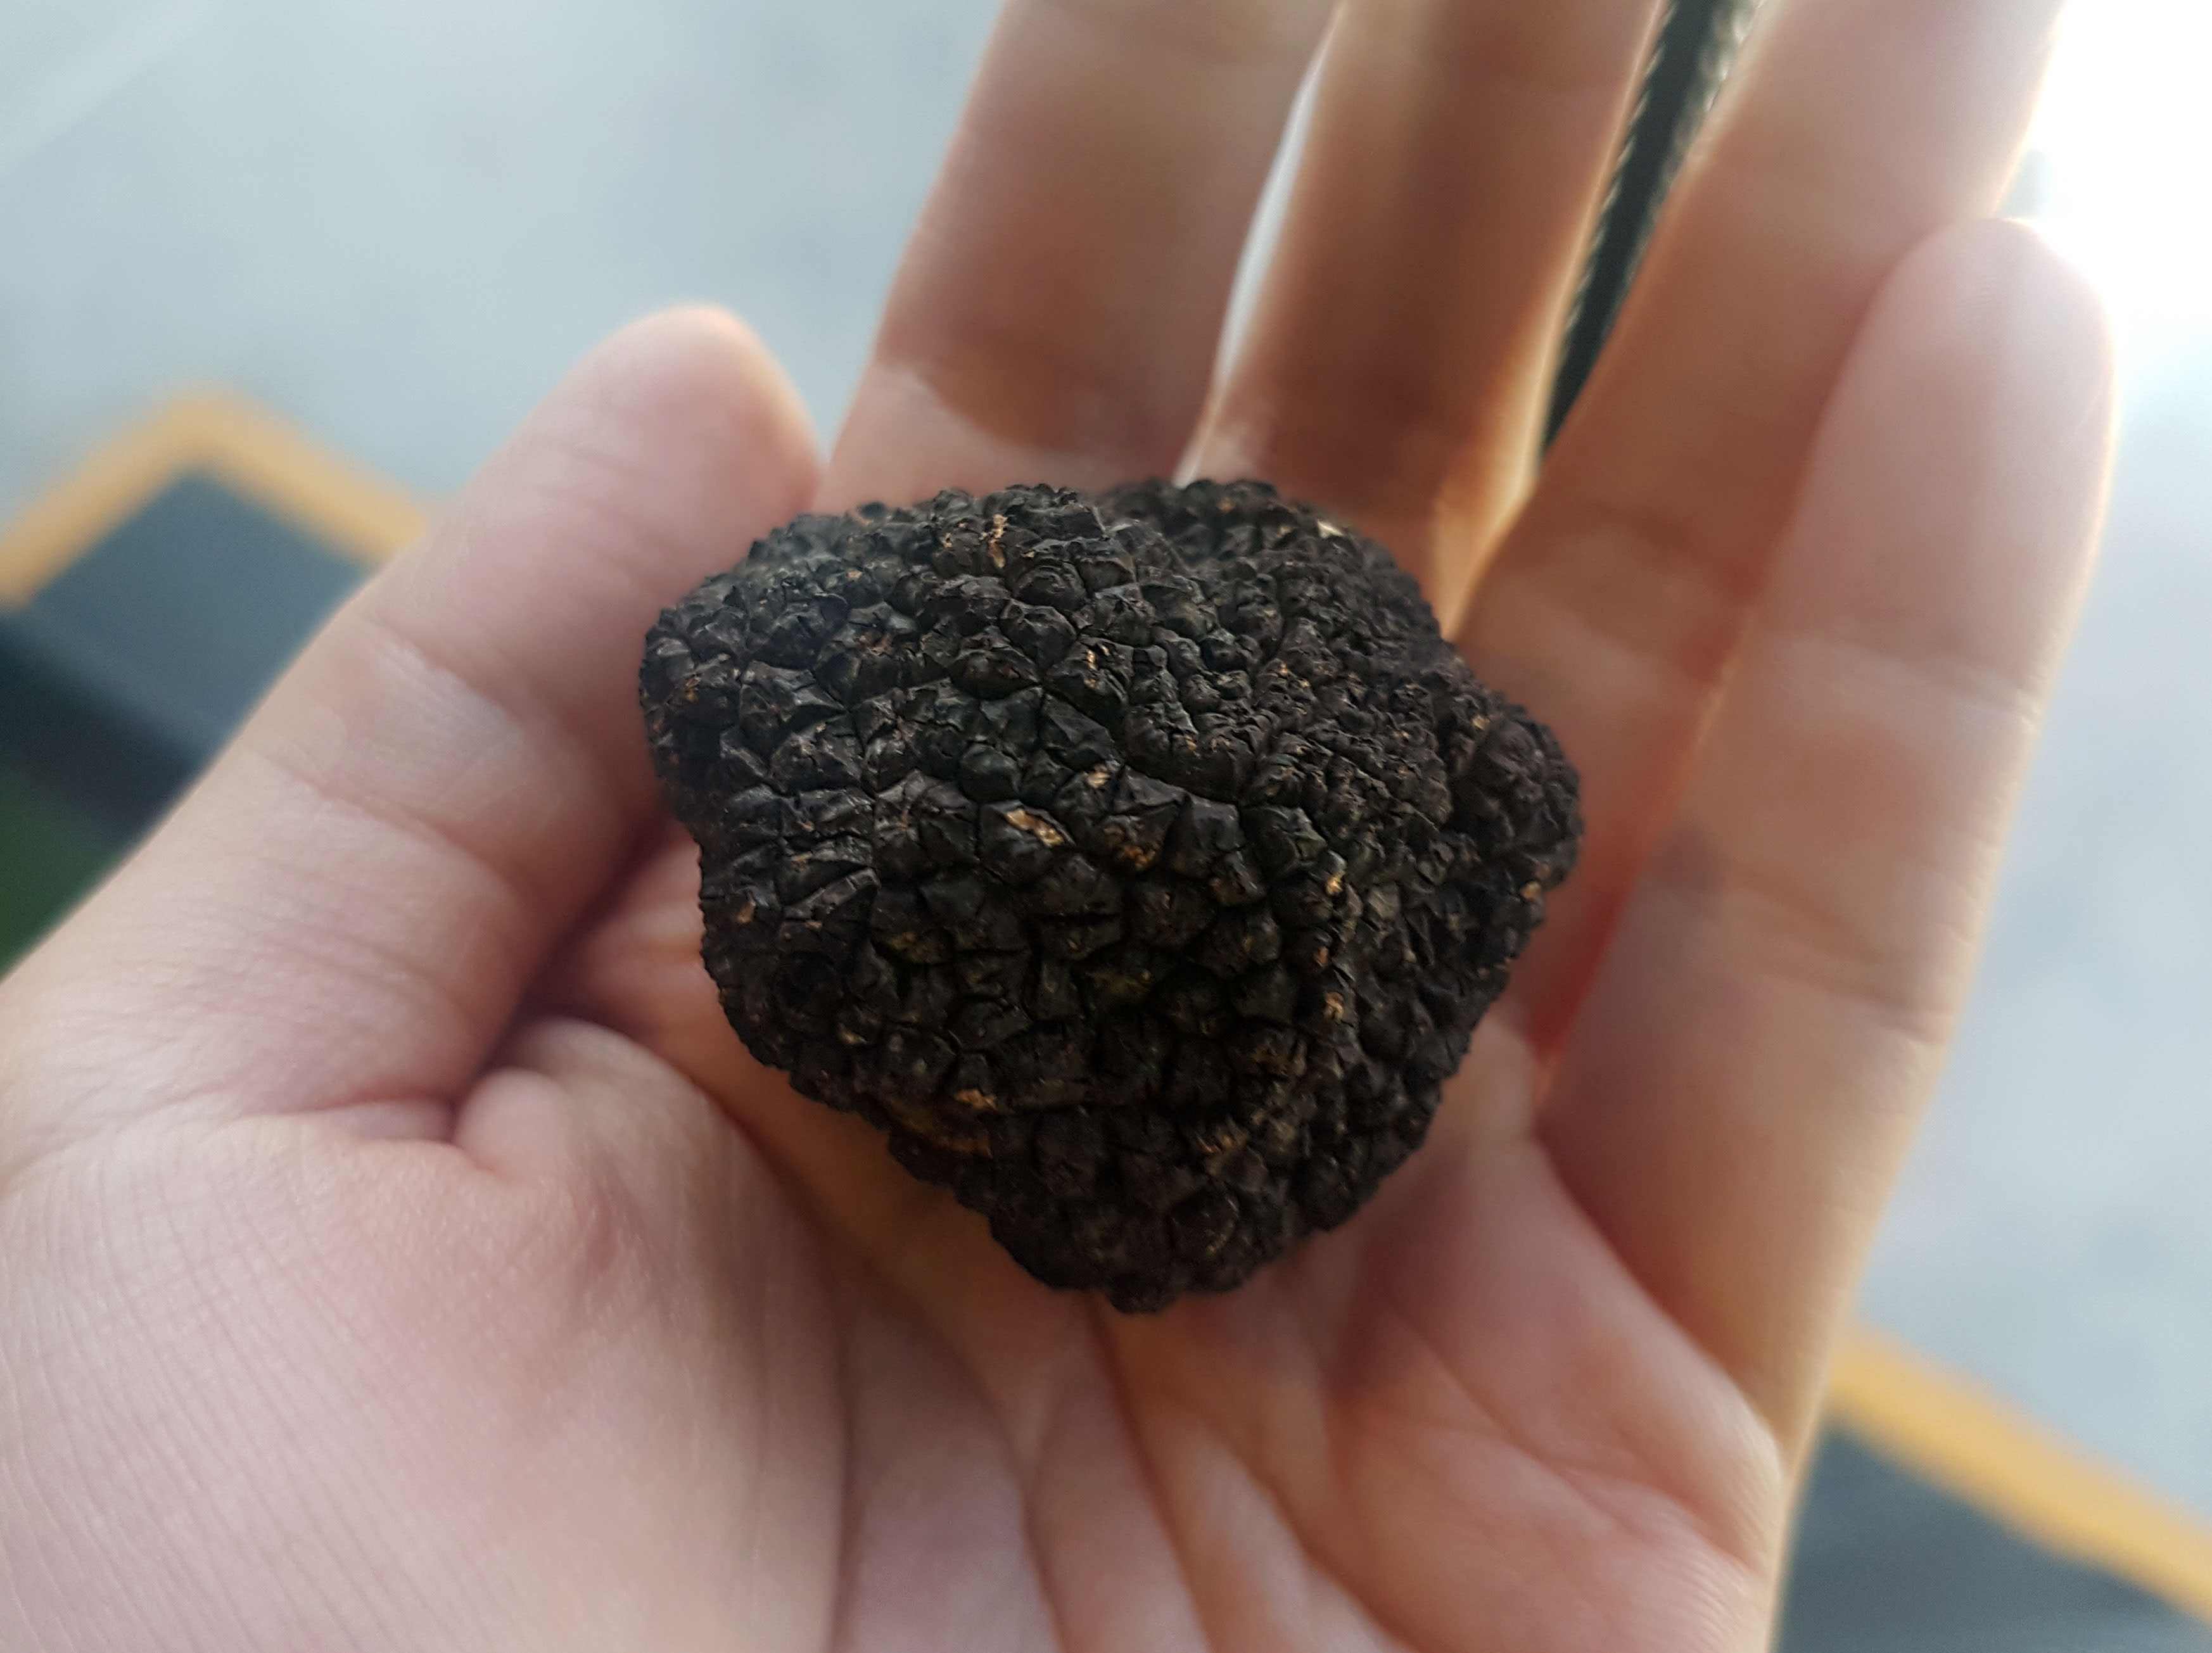 Can truffles be grown in Singapore? Yes, says one expert